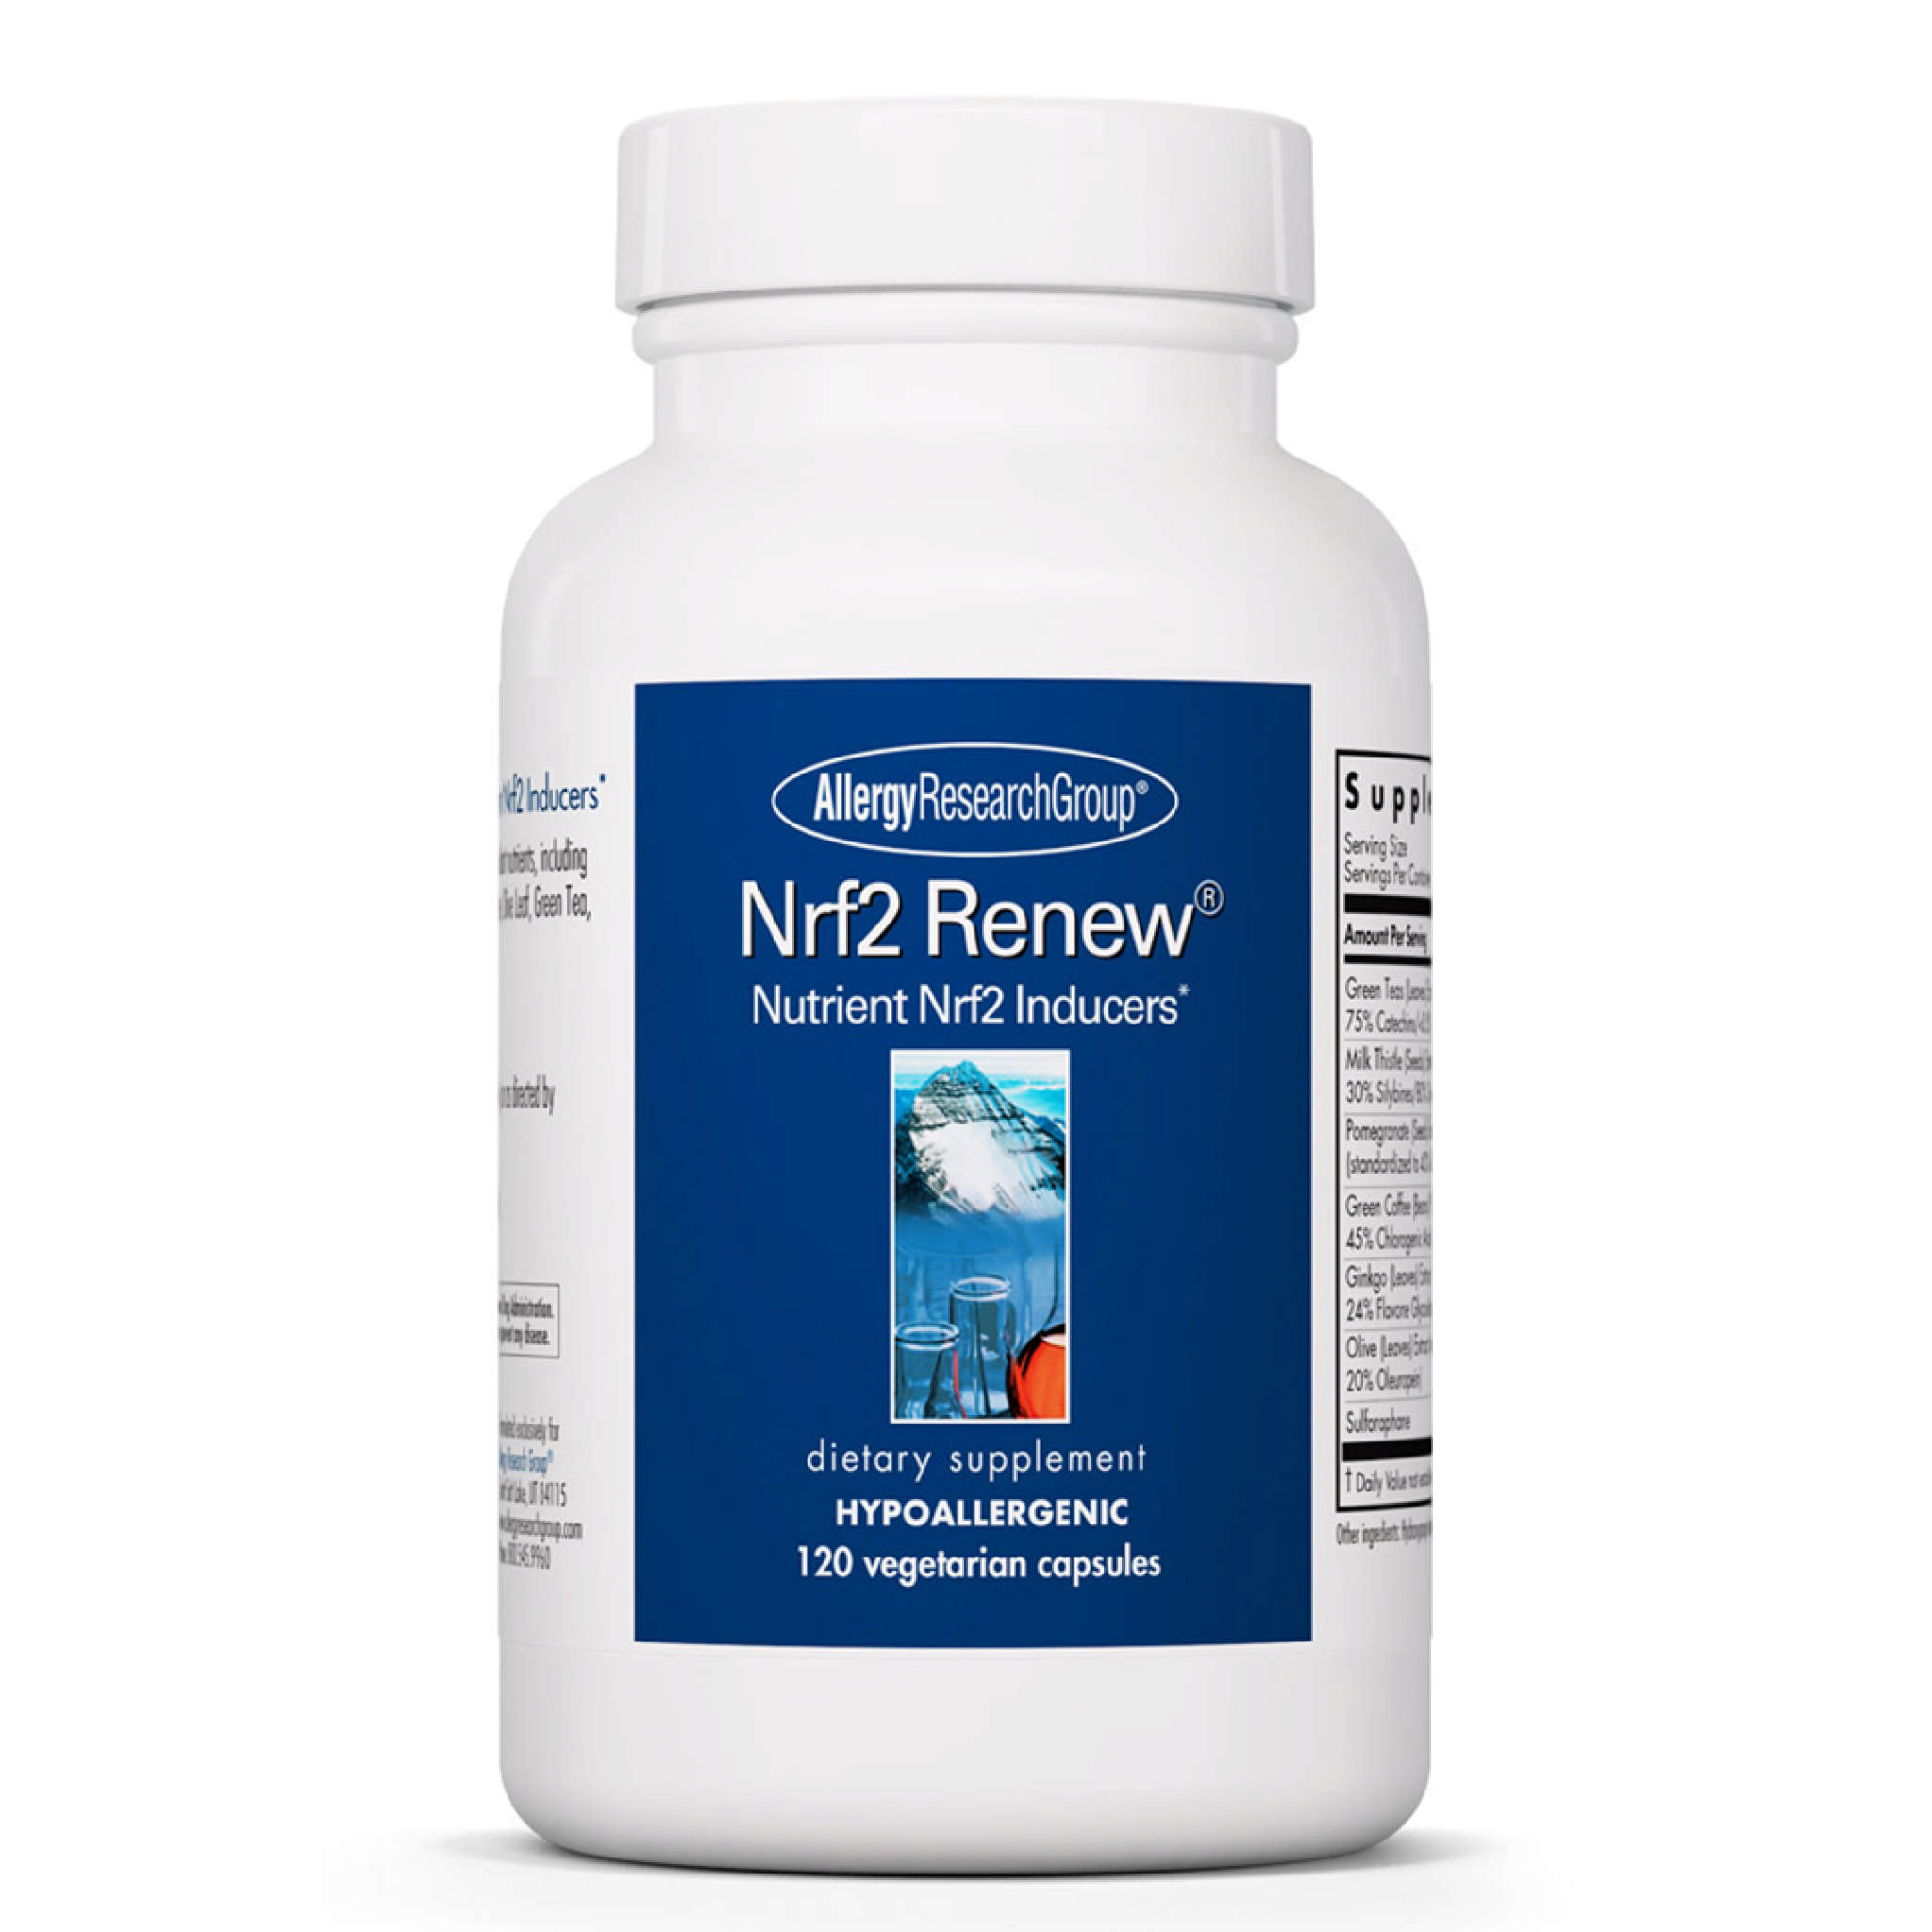 Allergy Research Group - Nrf2 Renew